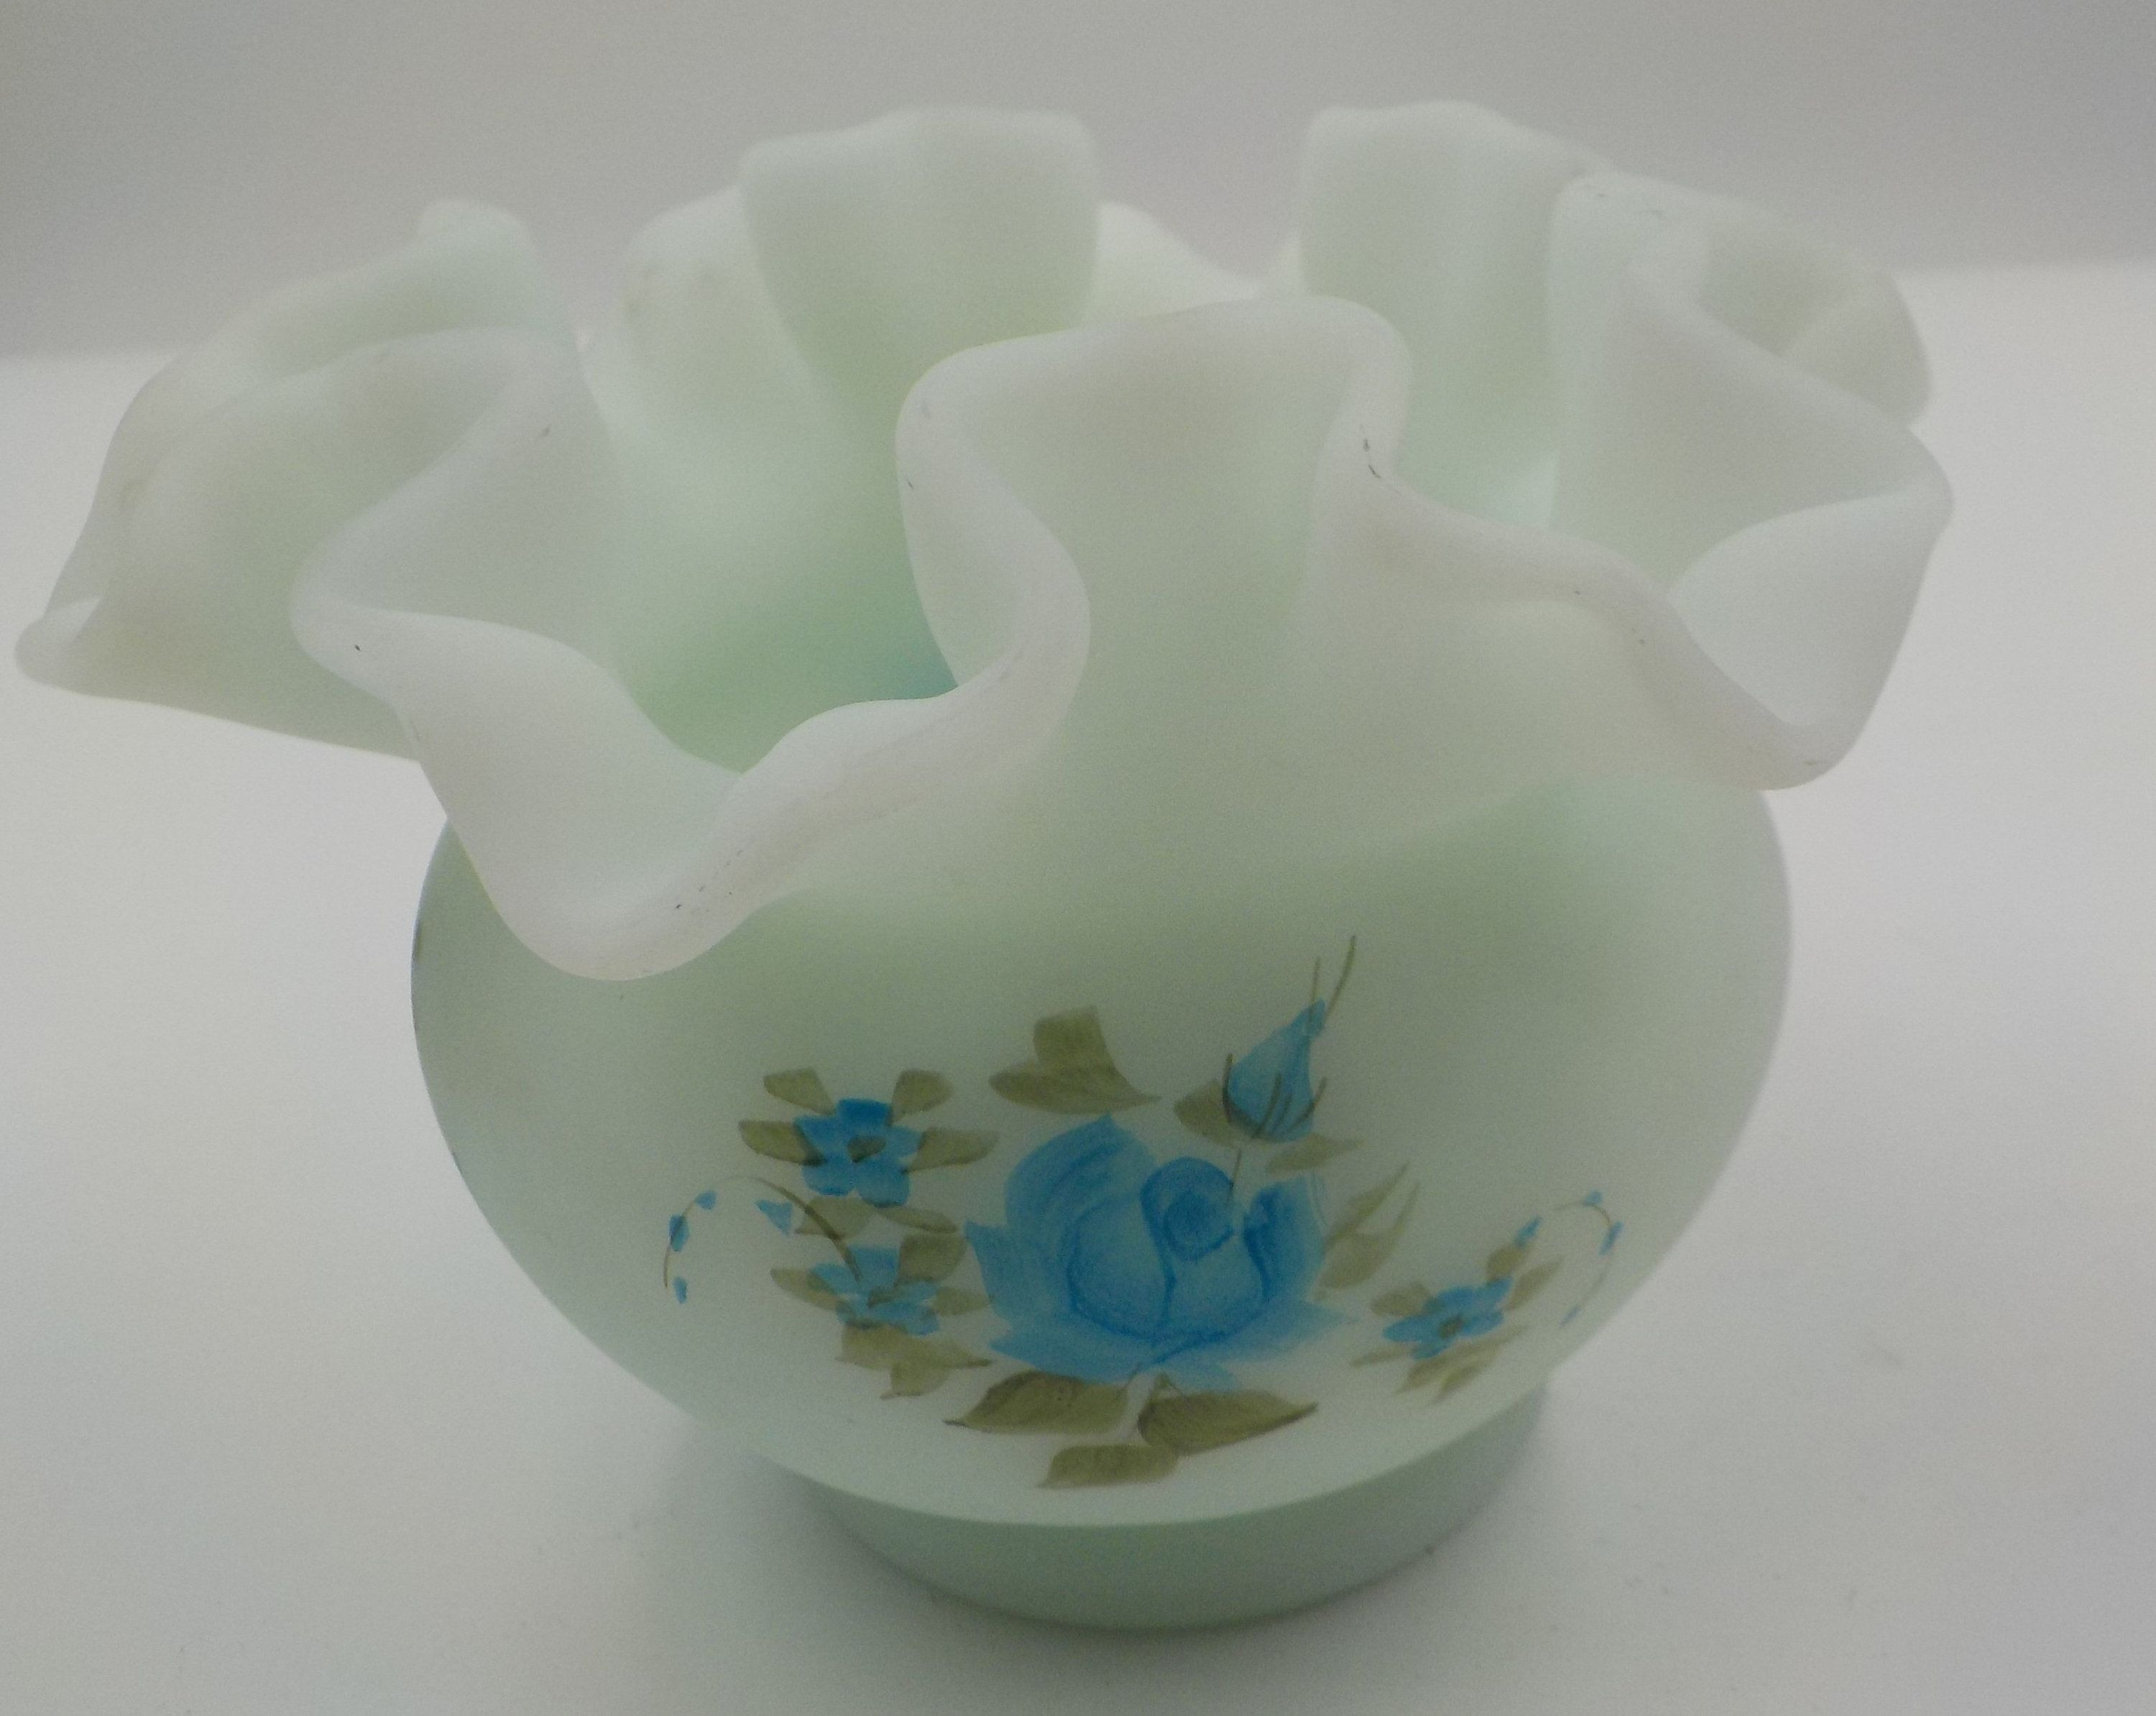 11 Lovely Pedestal Bowl Vase 2024 free download pedestal bowl vase of details about cambridge glass amber melon ivy bowl ball va with regard to beautiful fenton blue glass ivy bowl vase med size ruffles hand painted